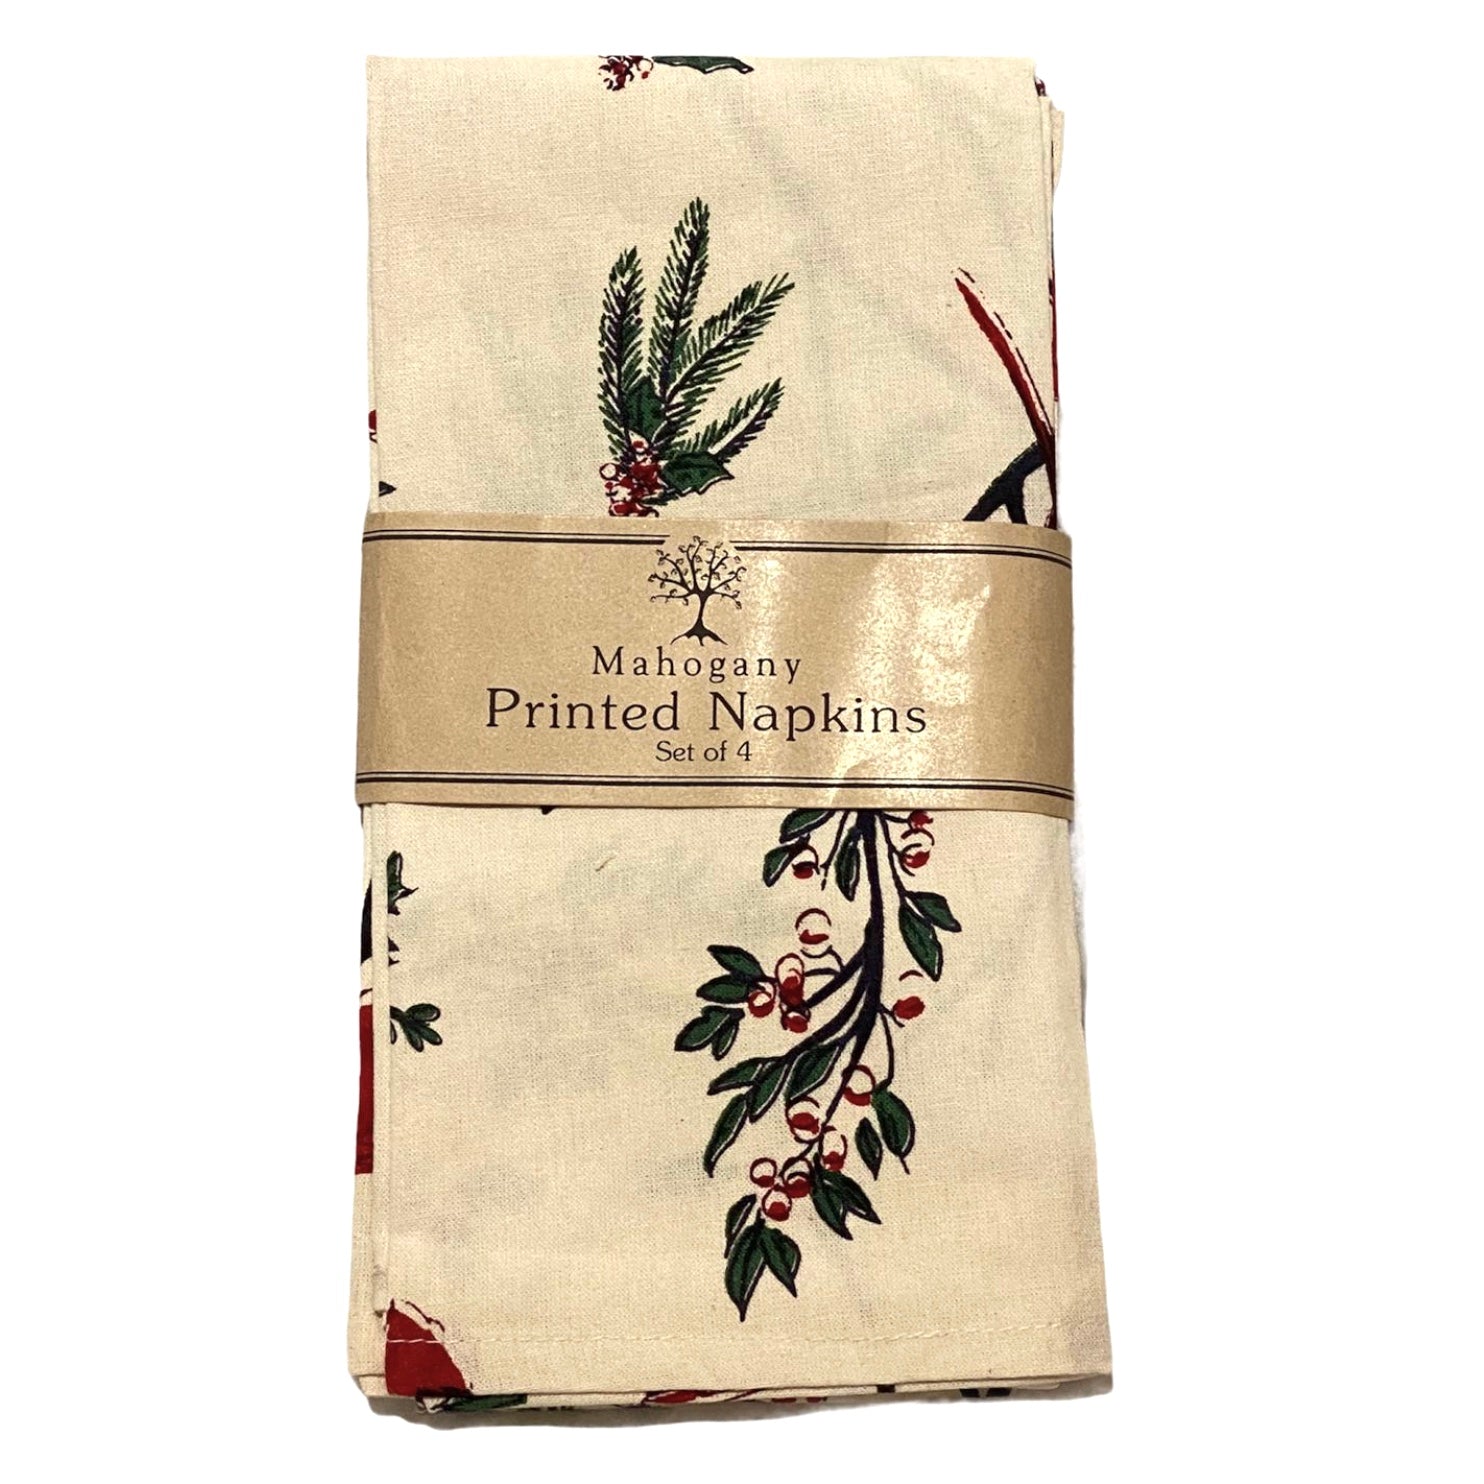 Cardinals in Holly Branches Napkins set of 4